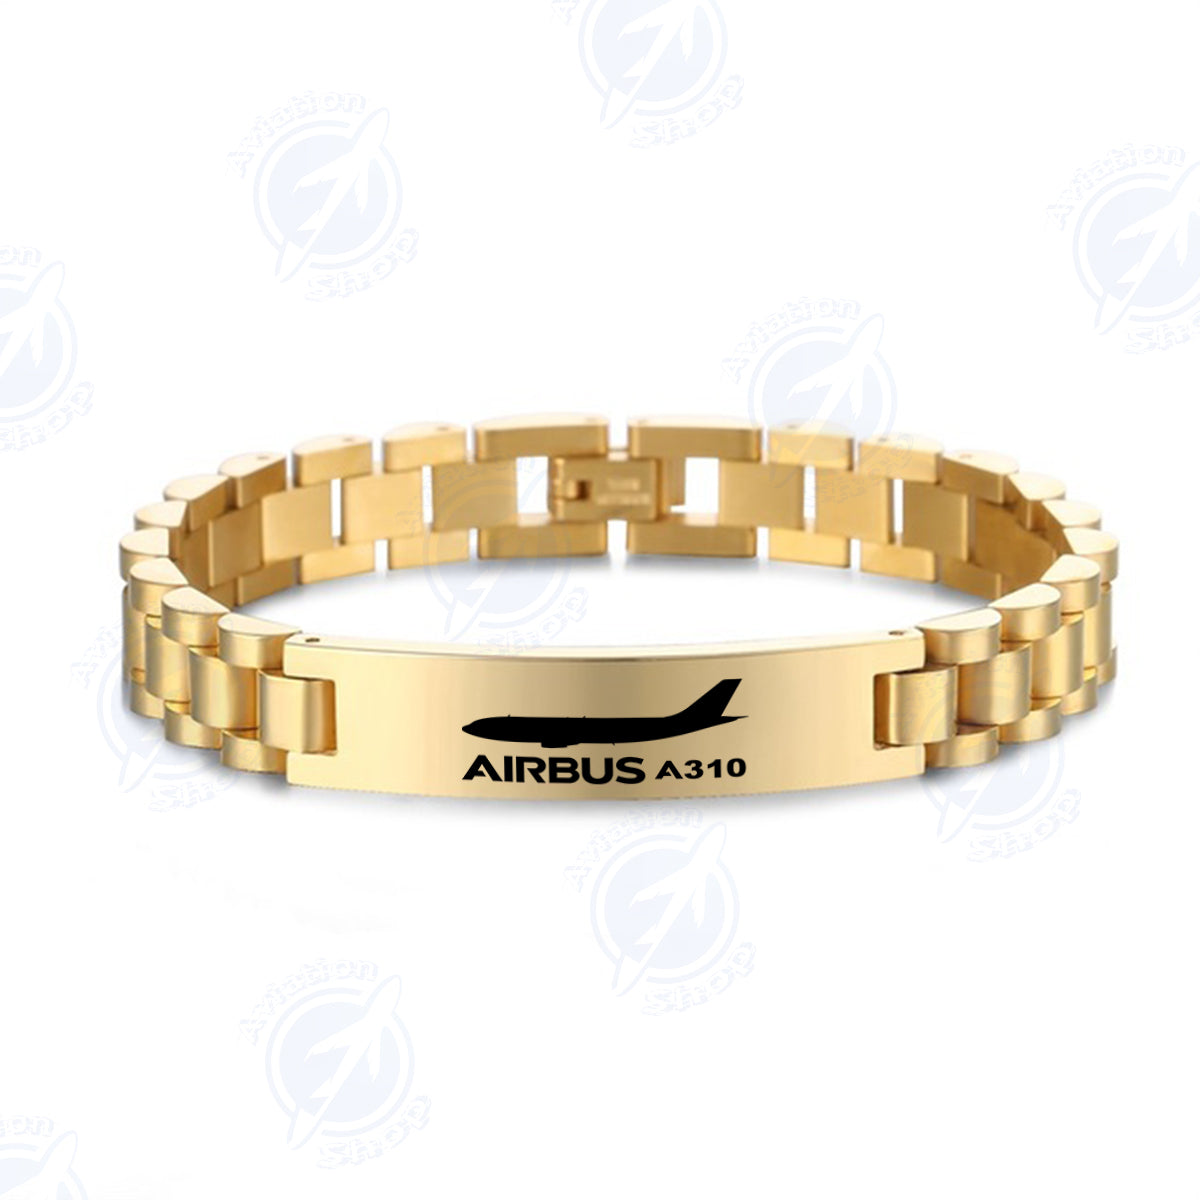 The Airbus A310 Designed Stainless Steel Chain Bracelets